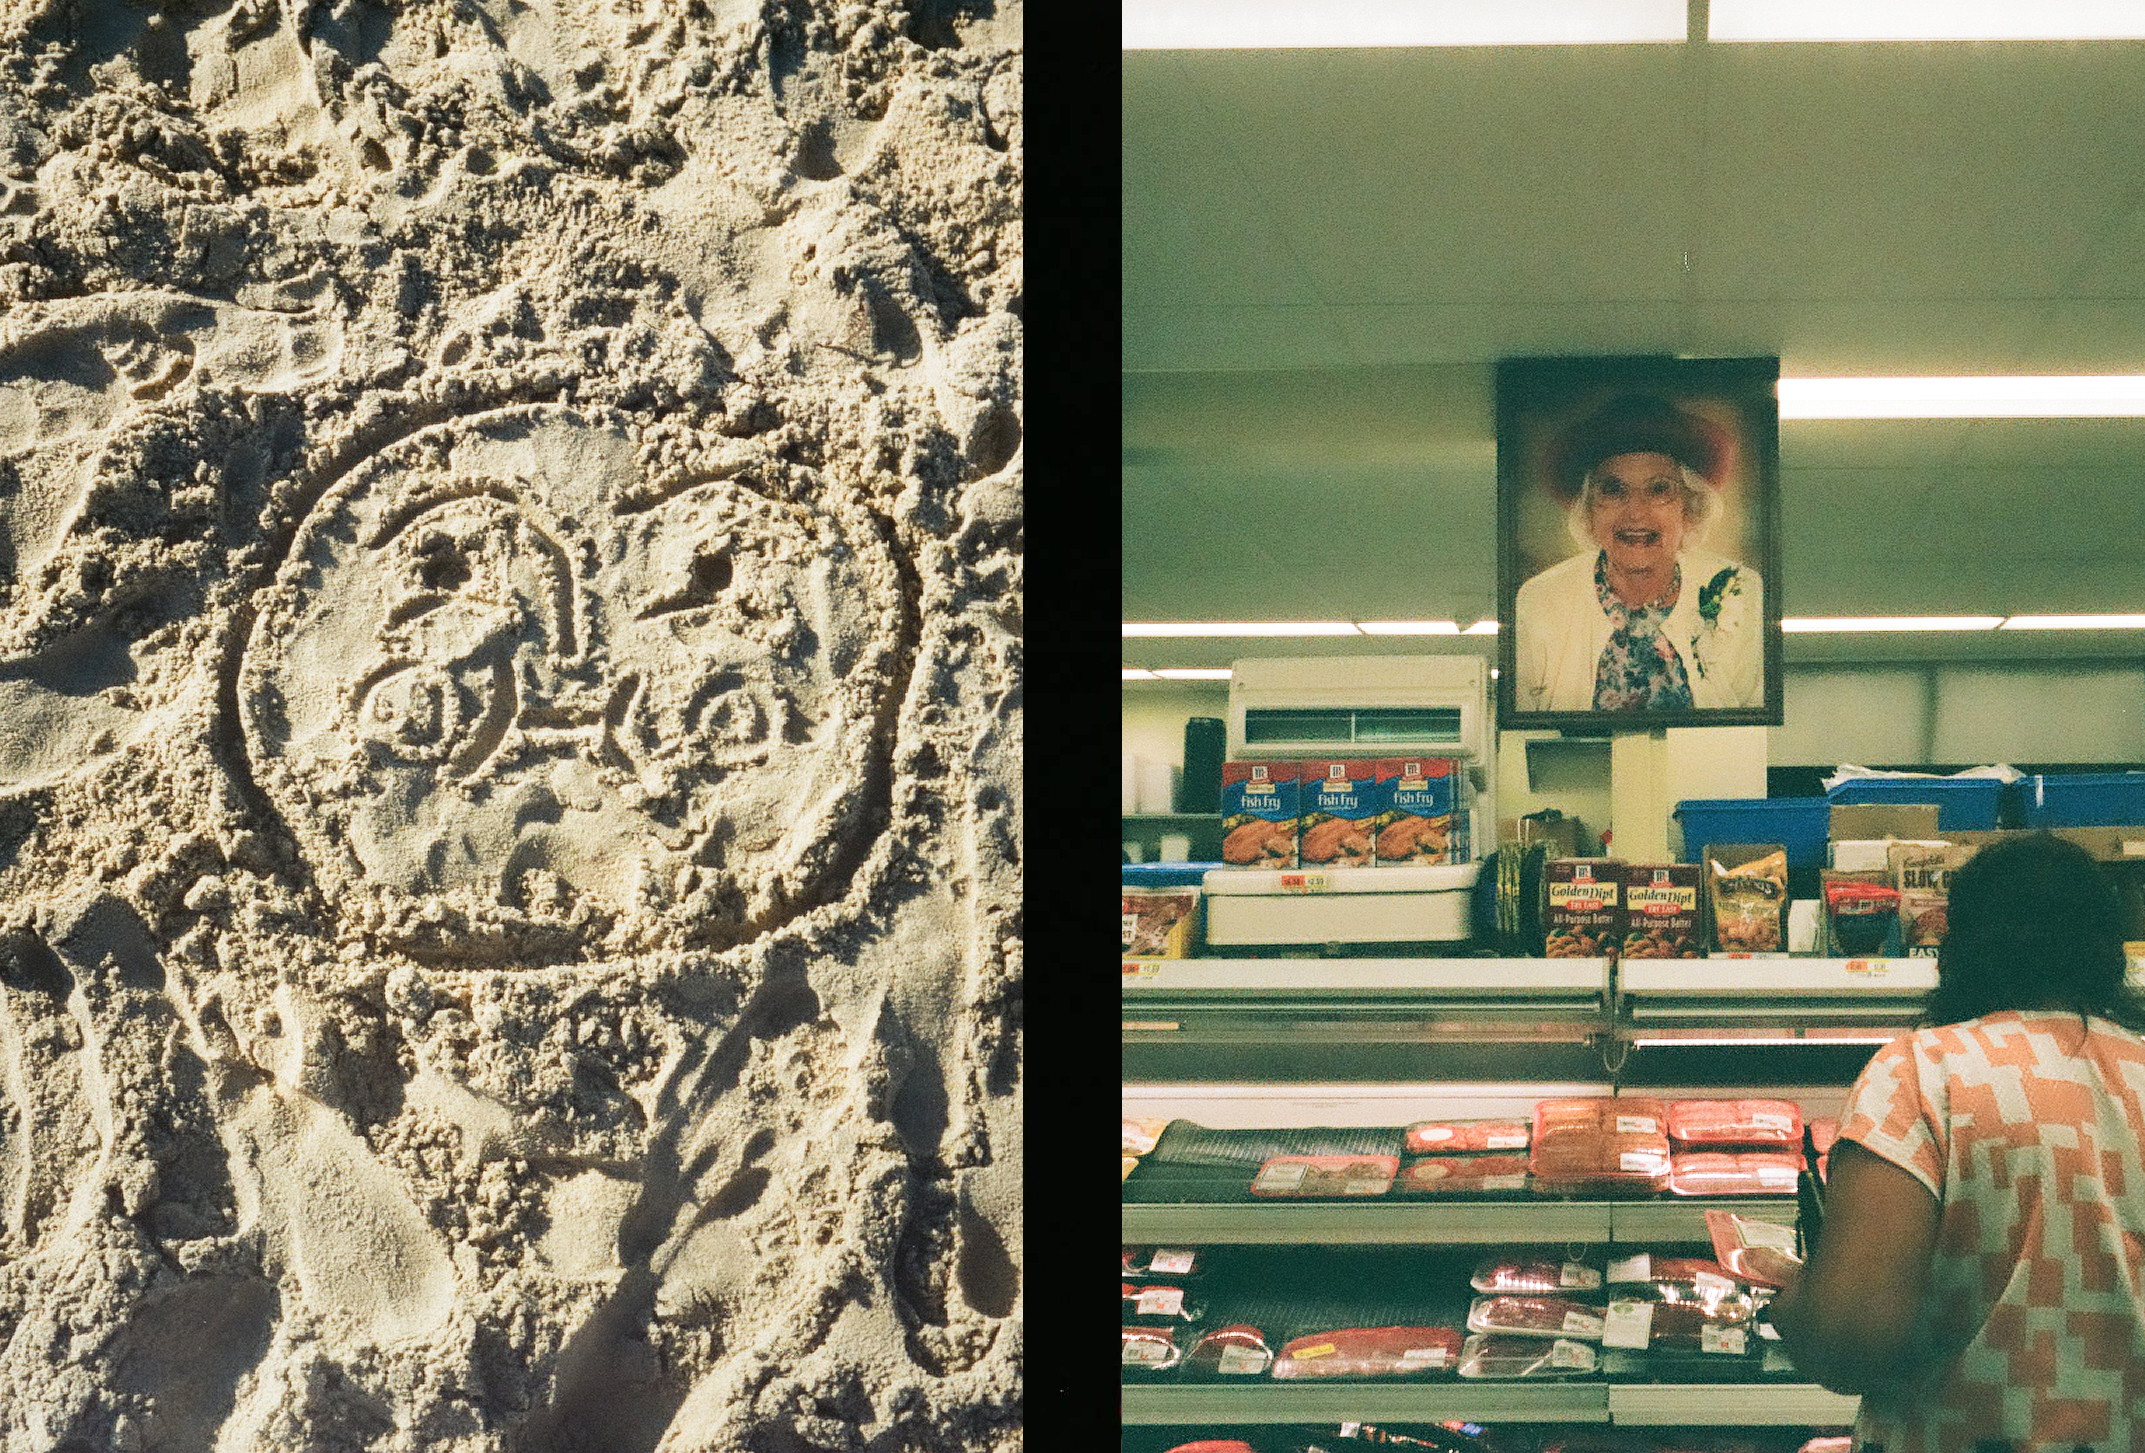 a face is drawn in beach sand and a portrait of an older woman hangs above the meat counter in a market